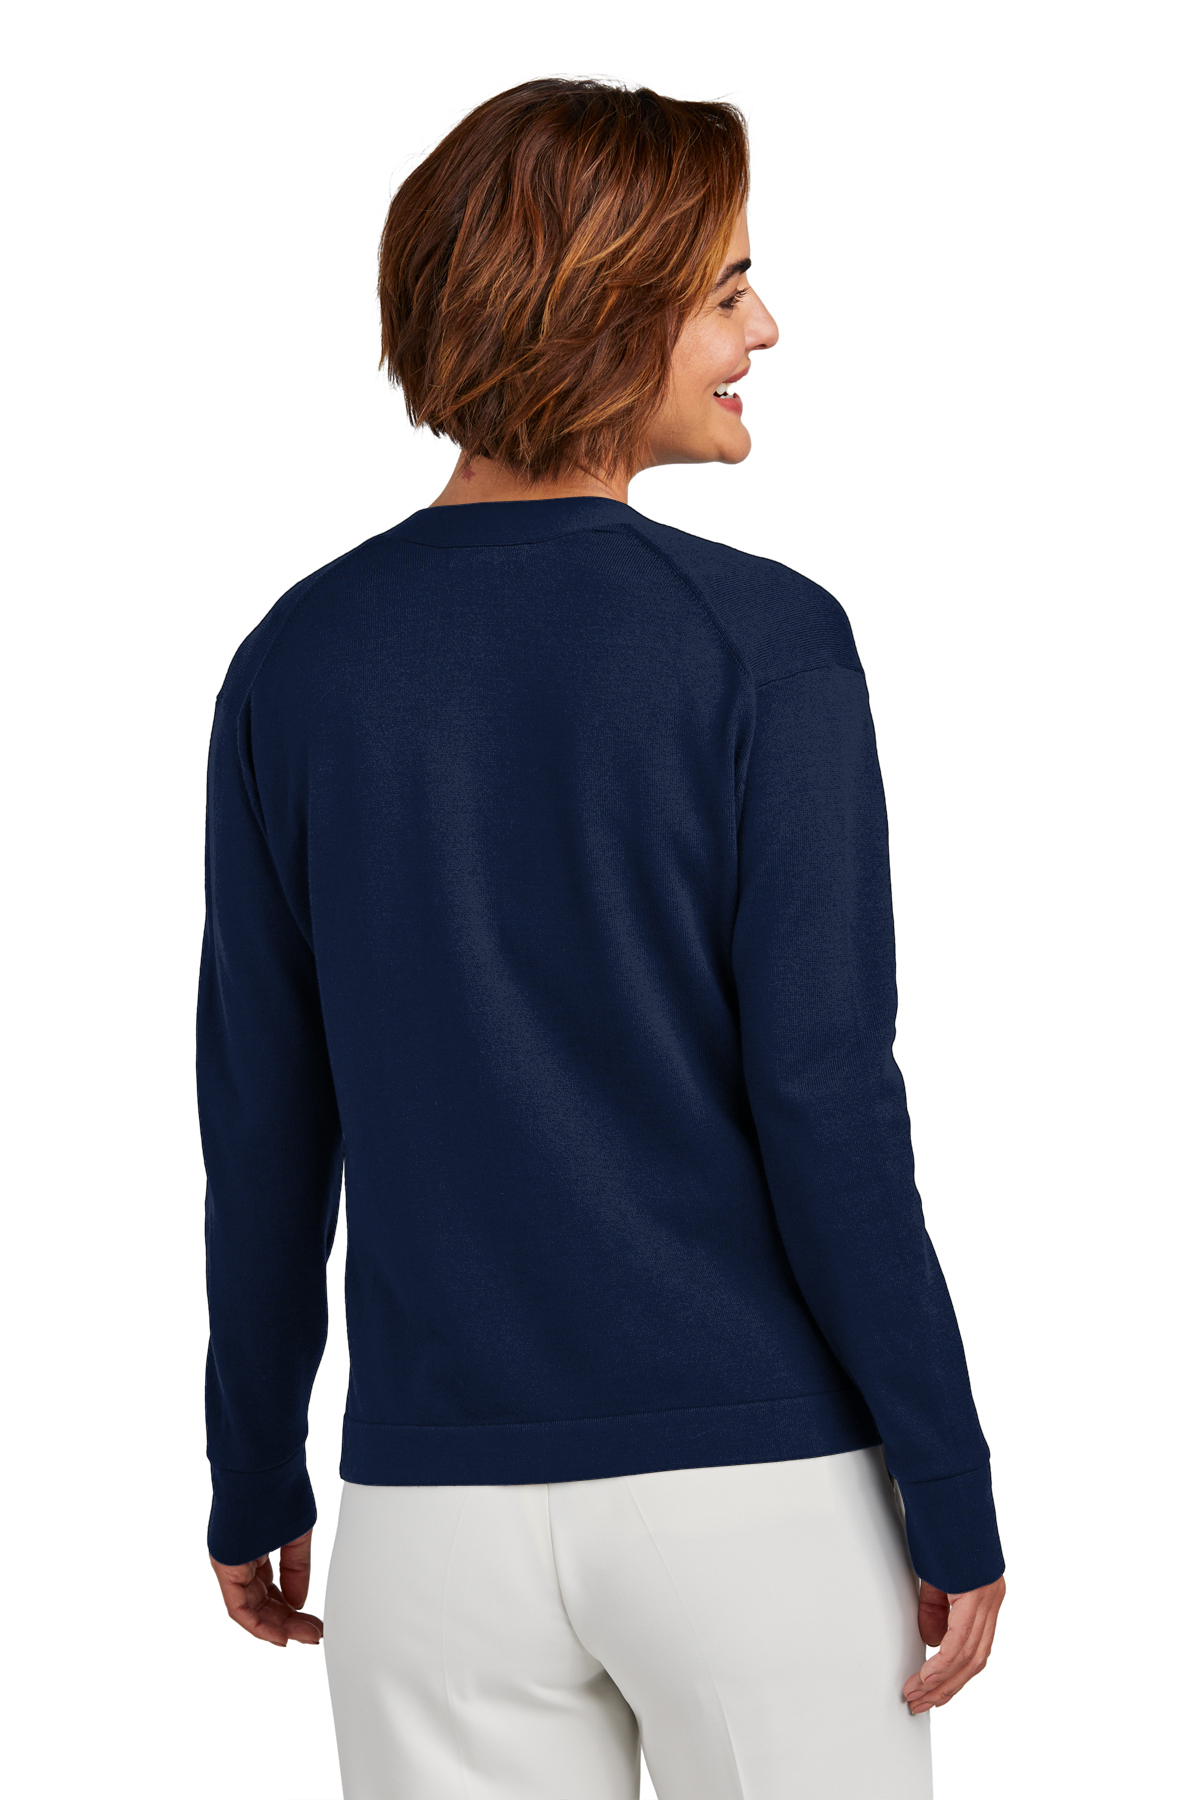 Brooks Brothers Women\'s Cotton Stretch Cardigan Sweater | Product | SanMar | Cardigans